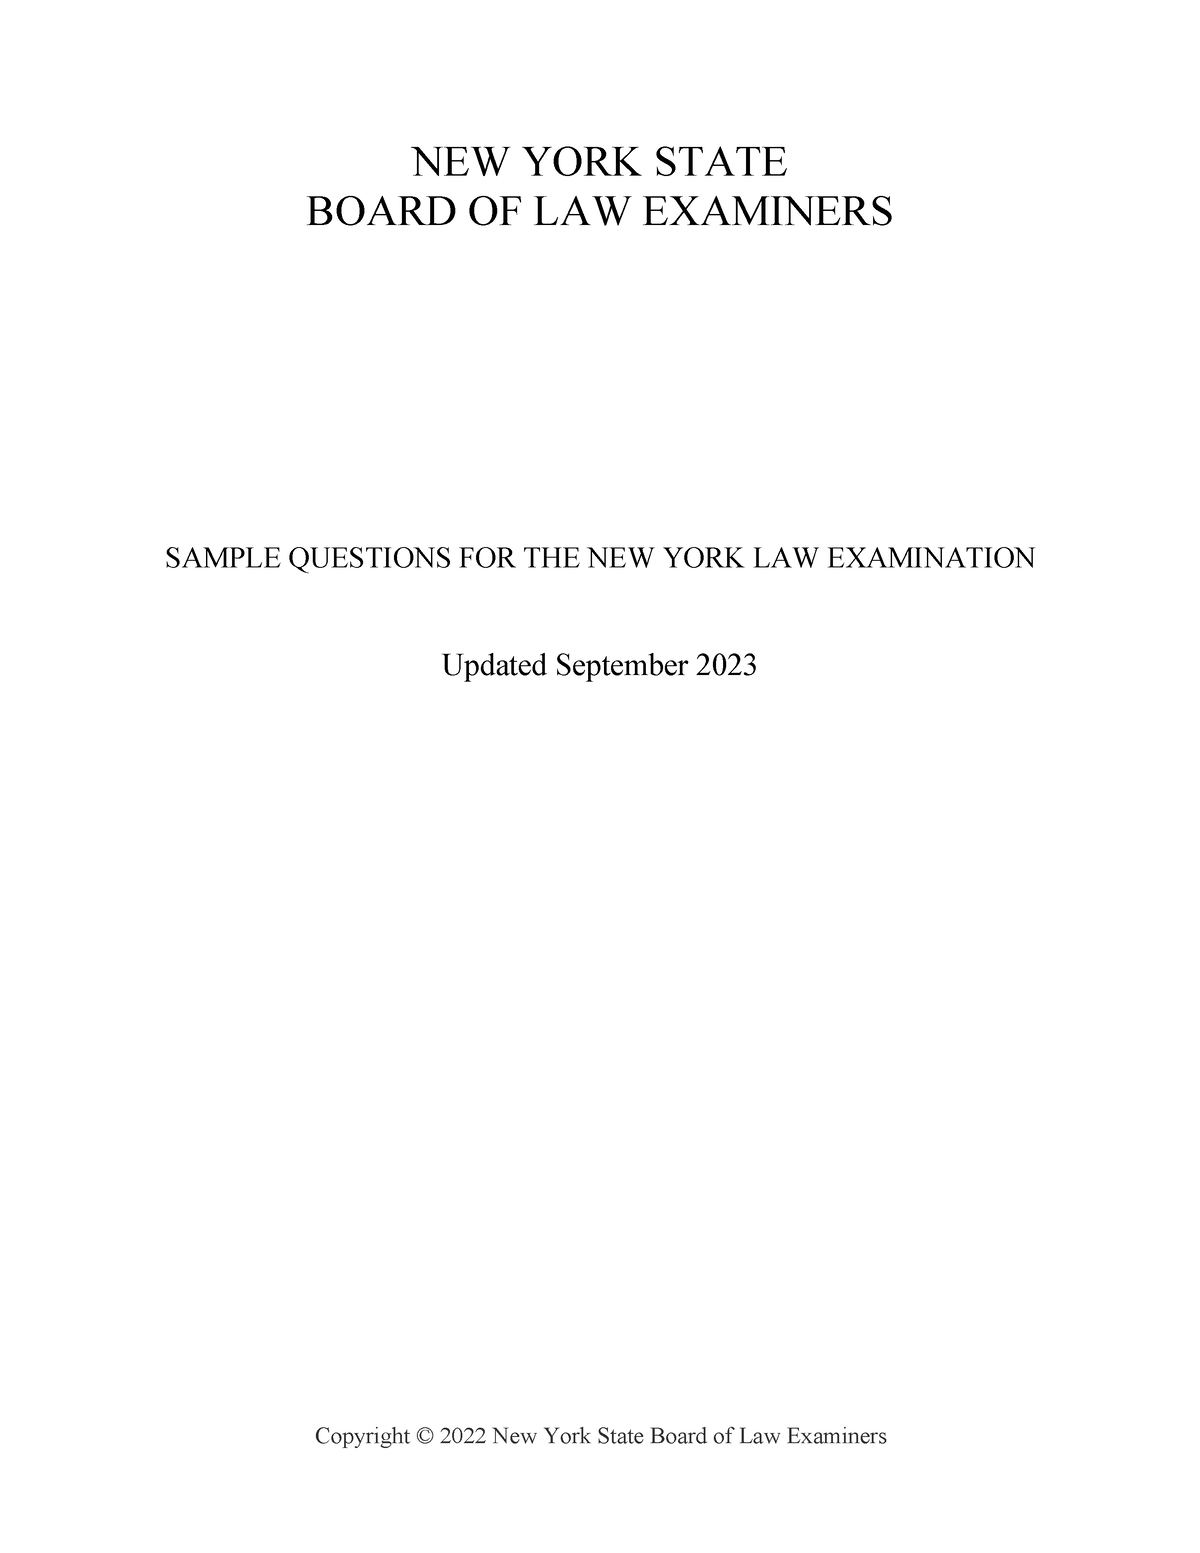 Nylesample Questions New York State Board Of Law Examiners Sample Questions For The New York